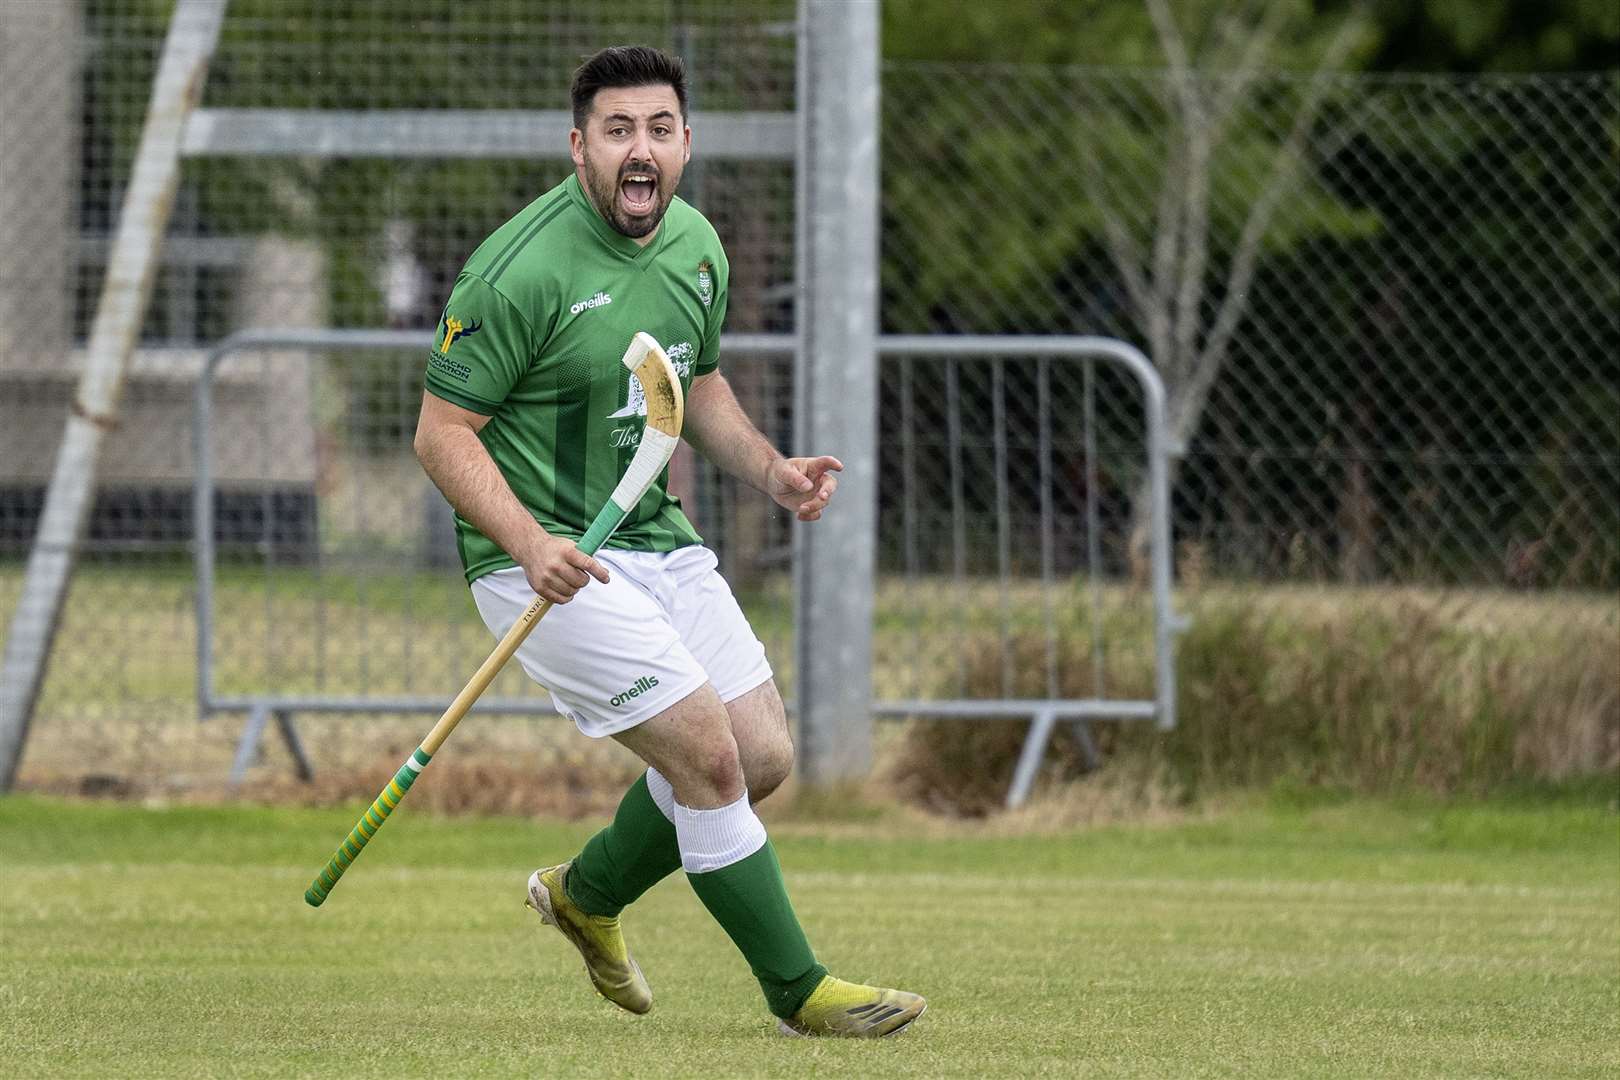 Jack Macdonald celebrates his last minute winning goal for Beauly. Beauly v Skye Camanachd in the quarter final of the Ferguson Transport Balliemore Cup, played at Braeview, Beauly.